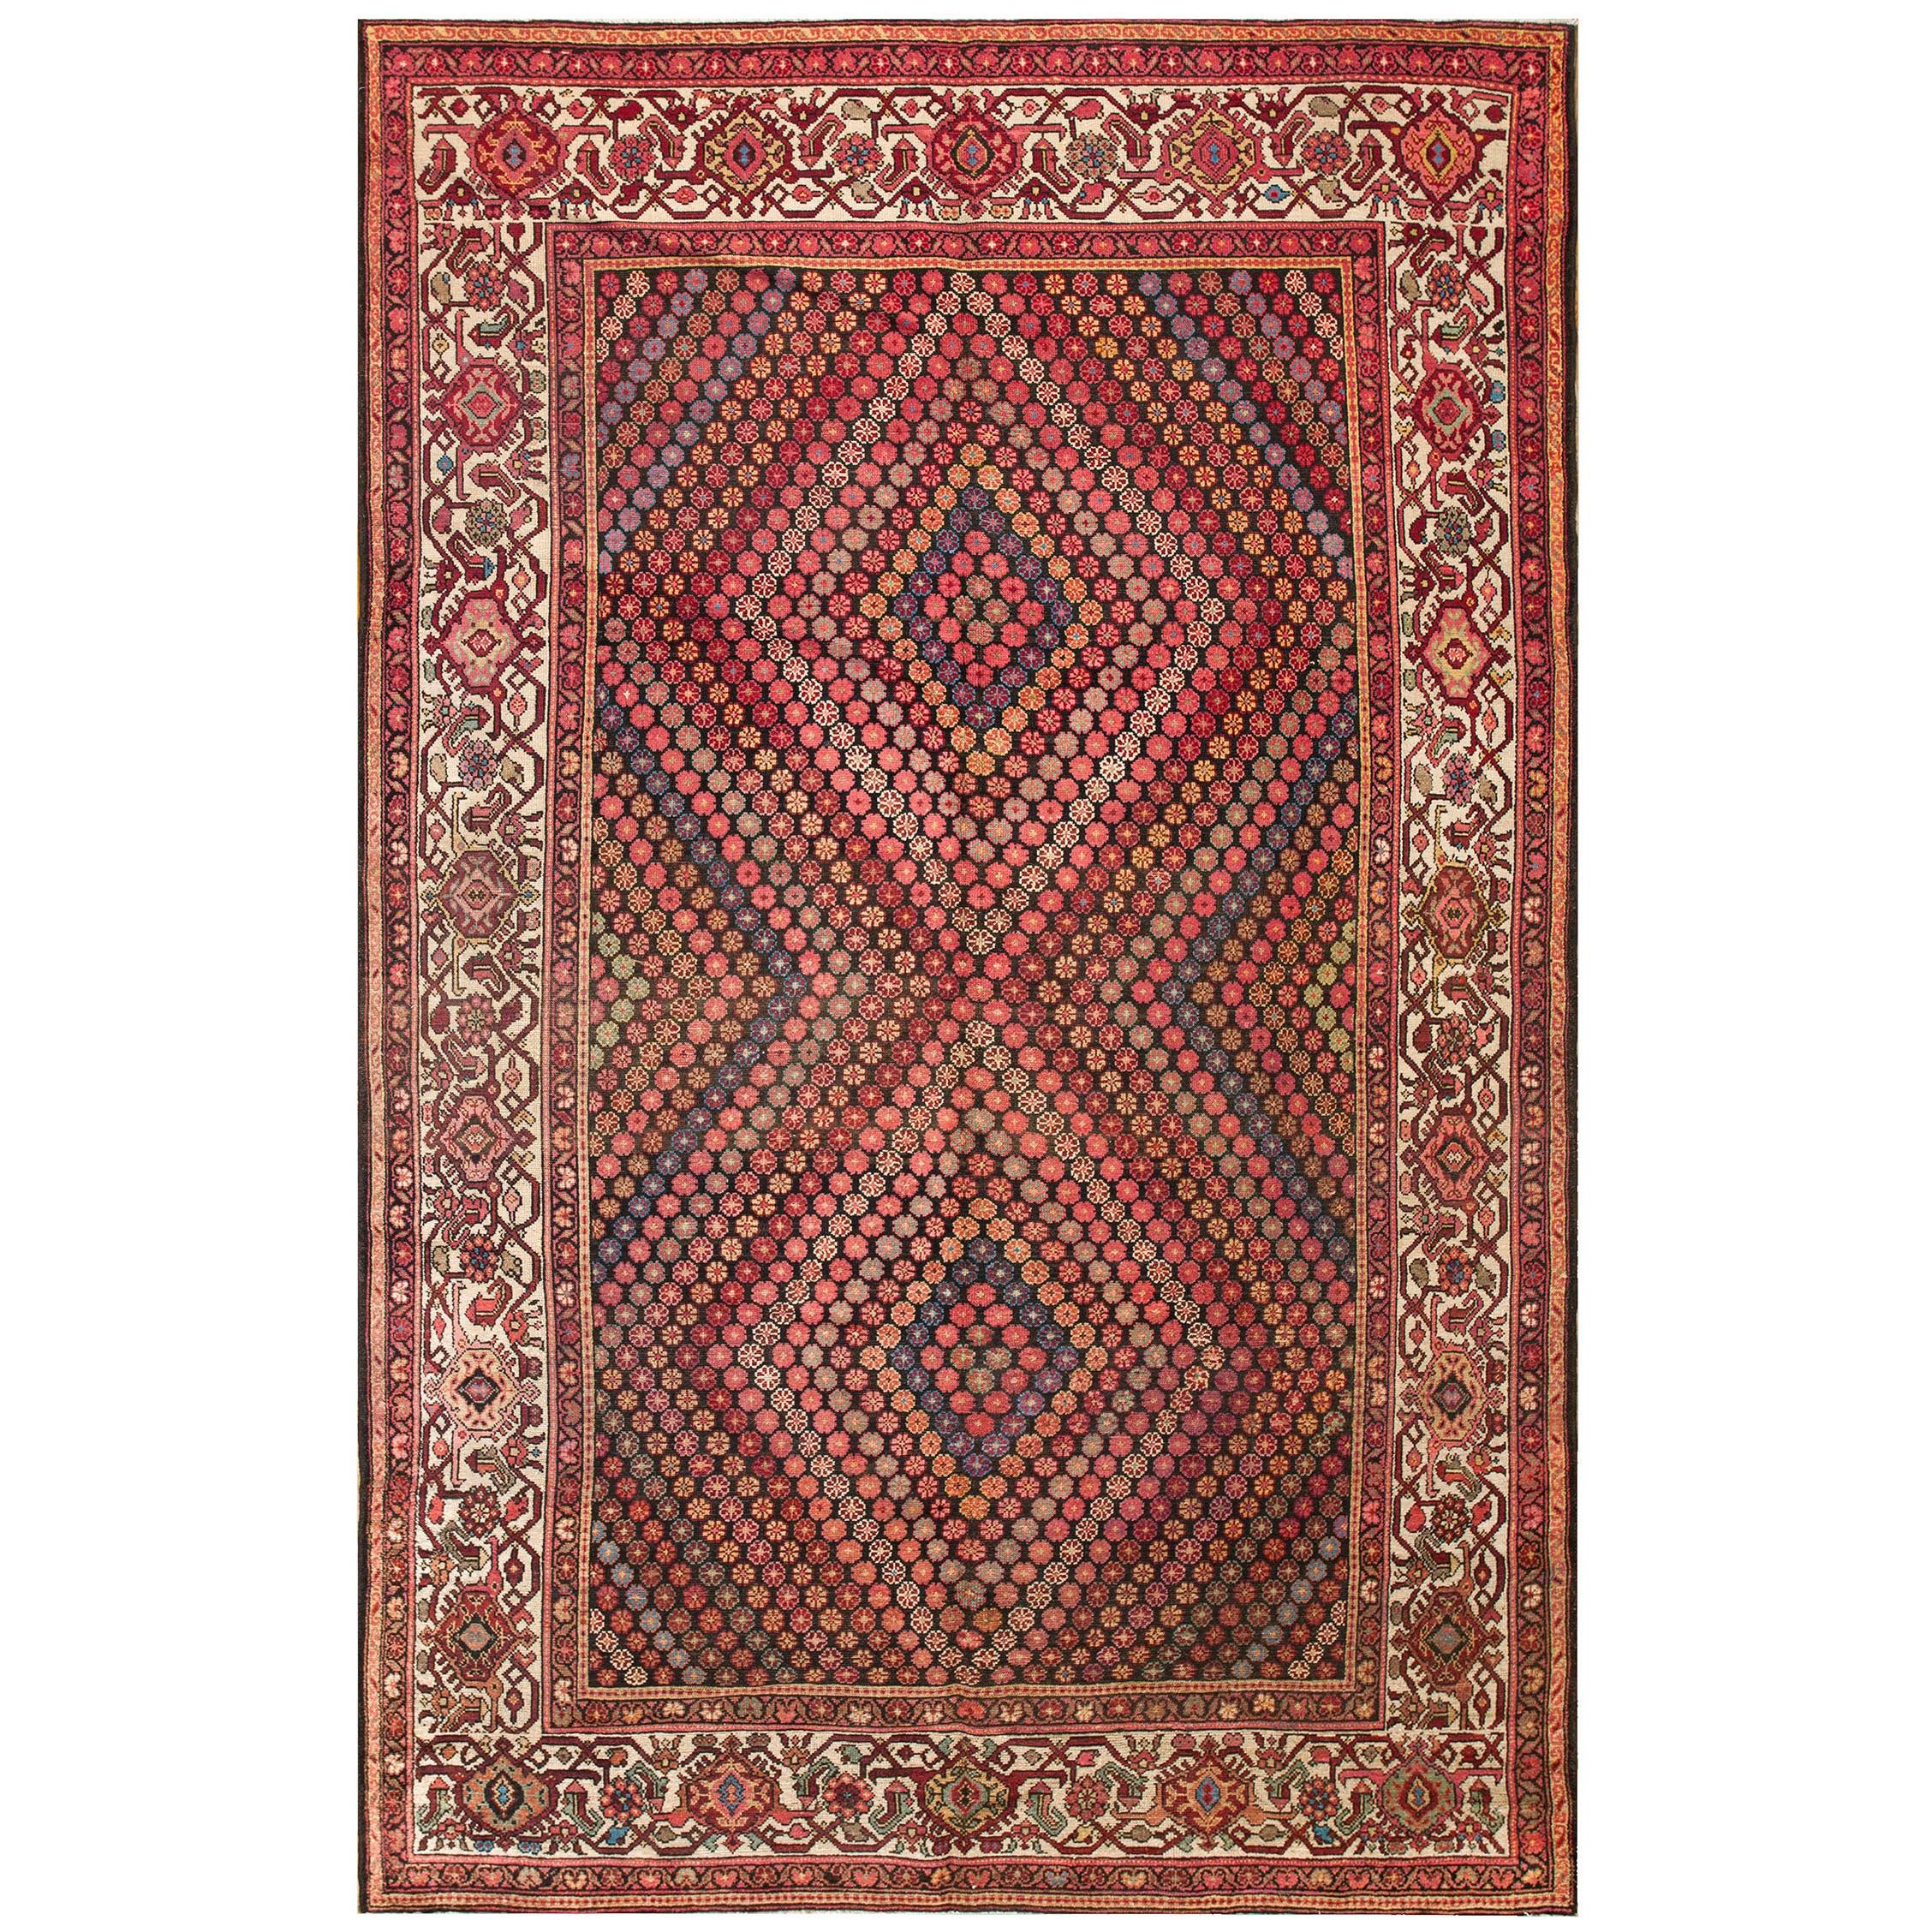 Early 20th Century Persian Malayer Carpet ( 6'9" x 10'8" - 205 x 325 cm ) For Sale